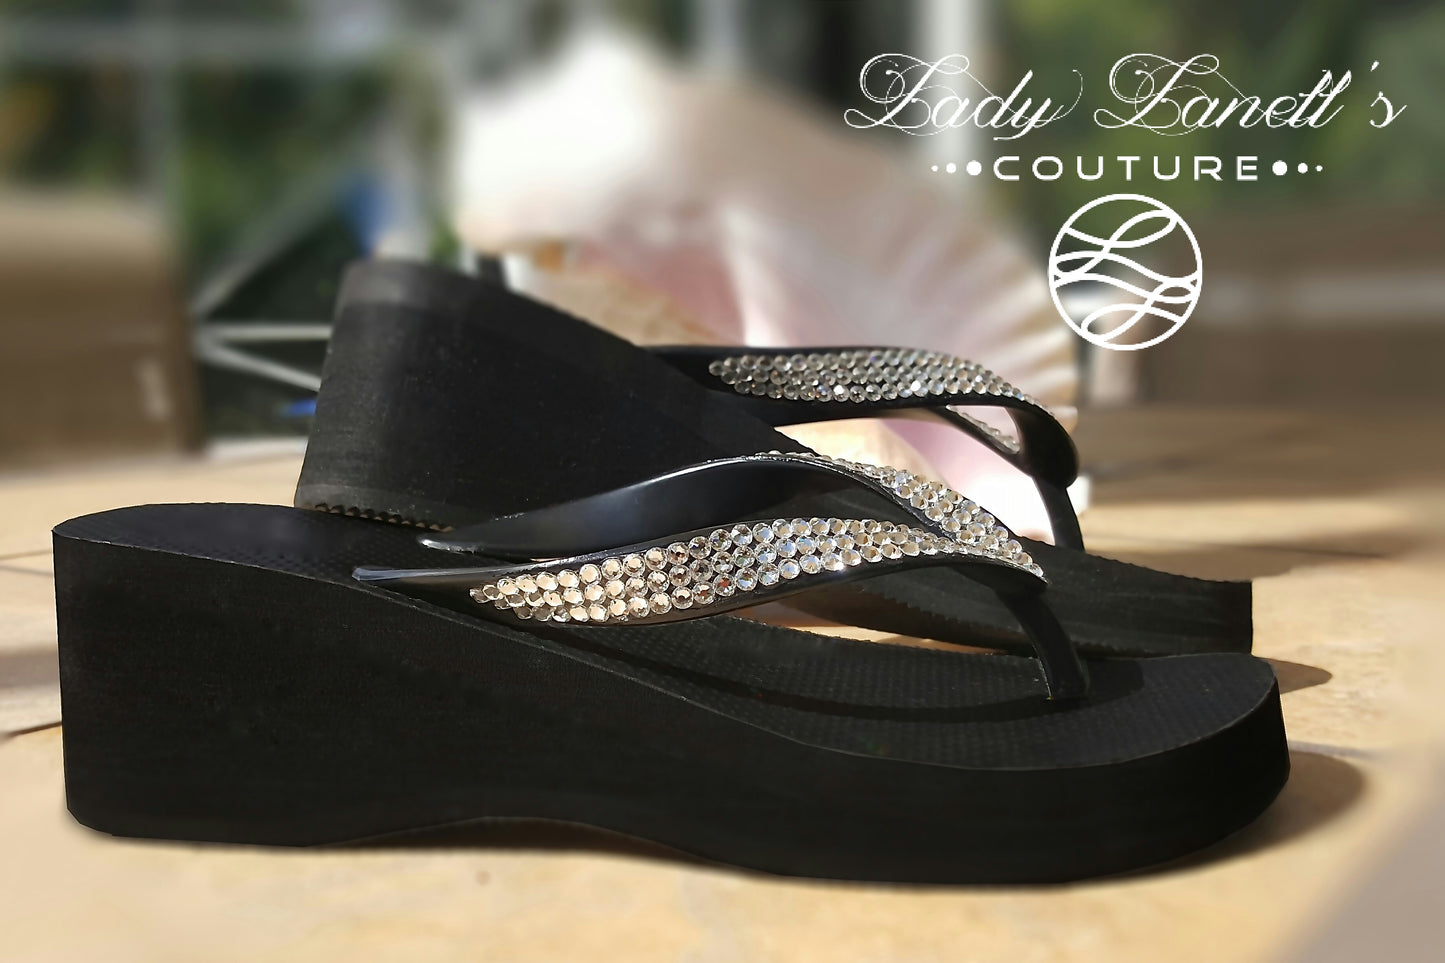 High Night Sandal in Black with all clear crystals